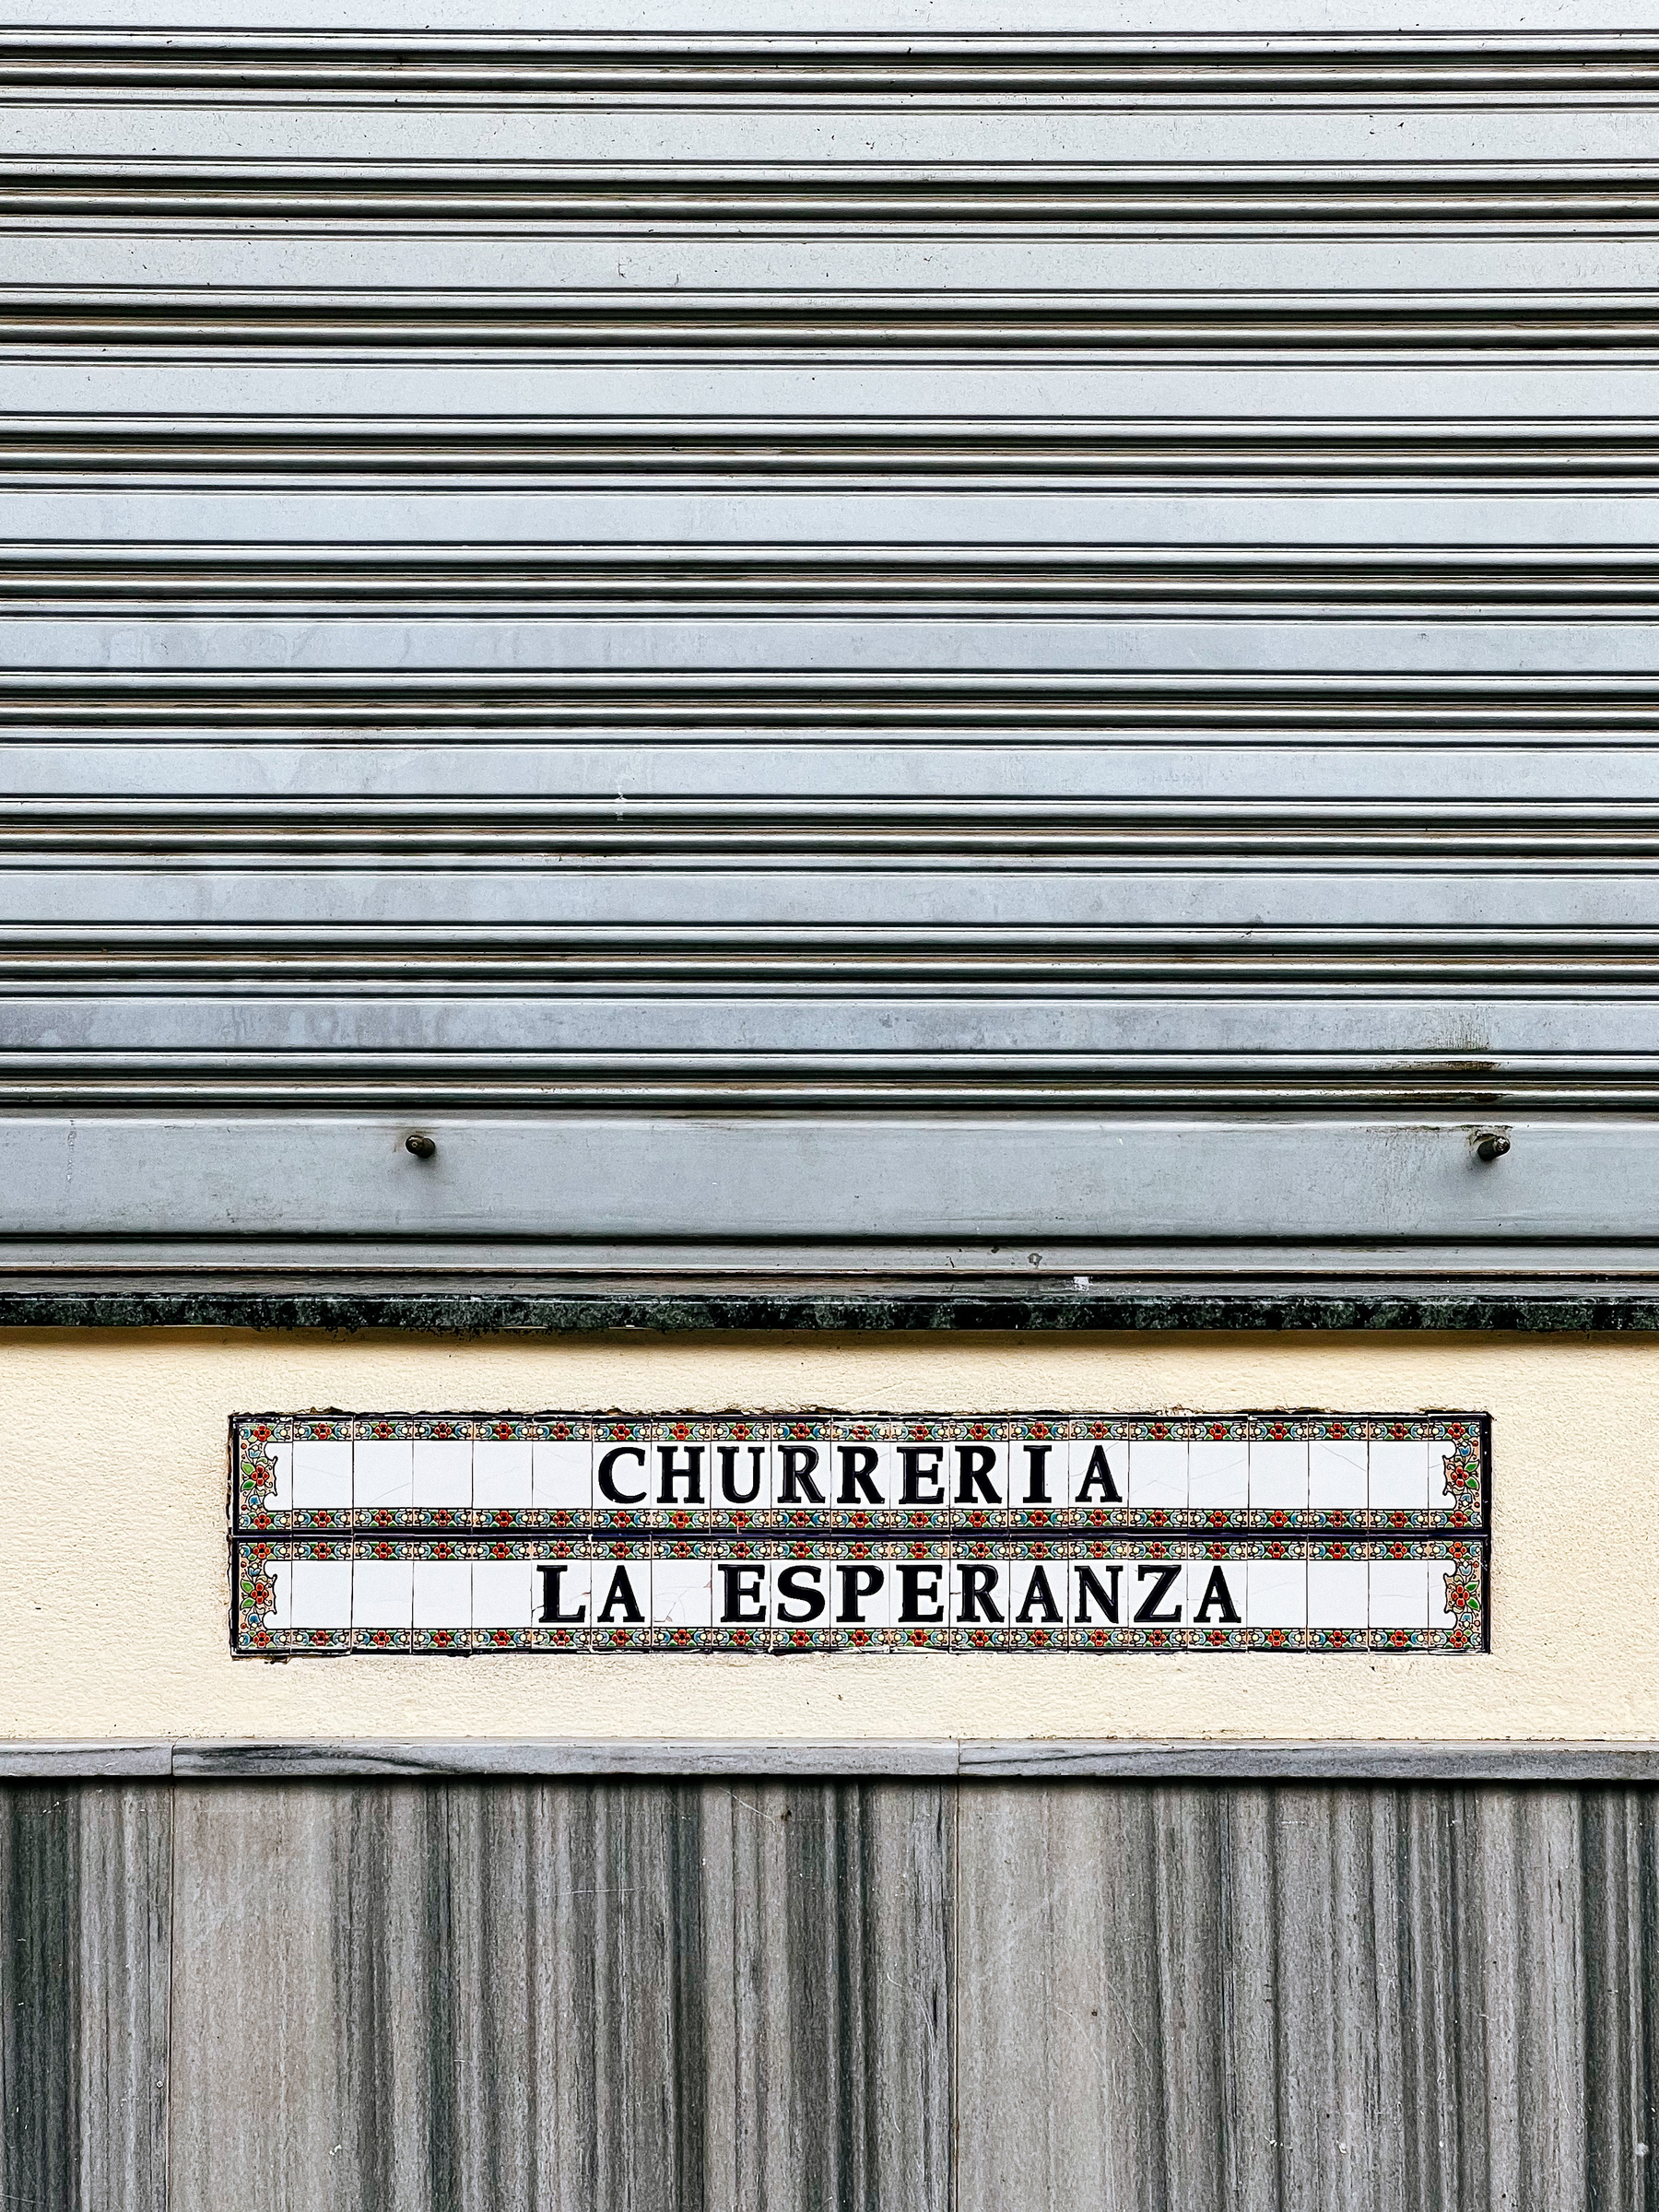 a store front, “churreria” written on it